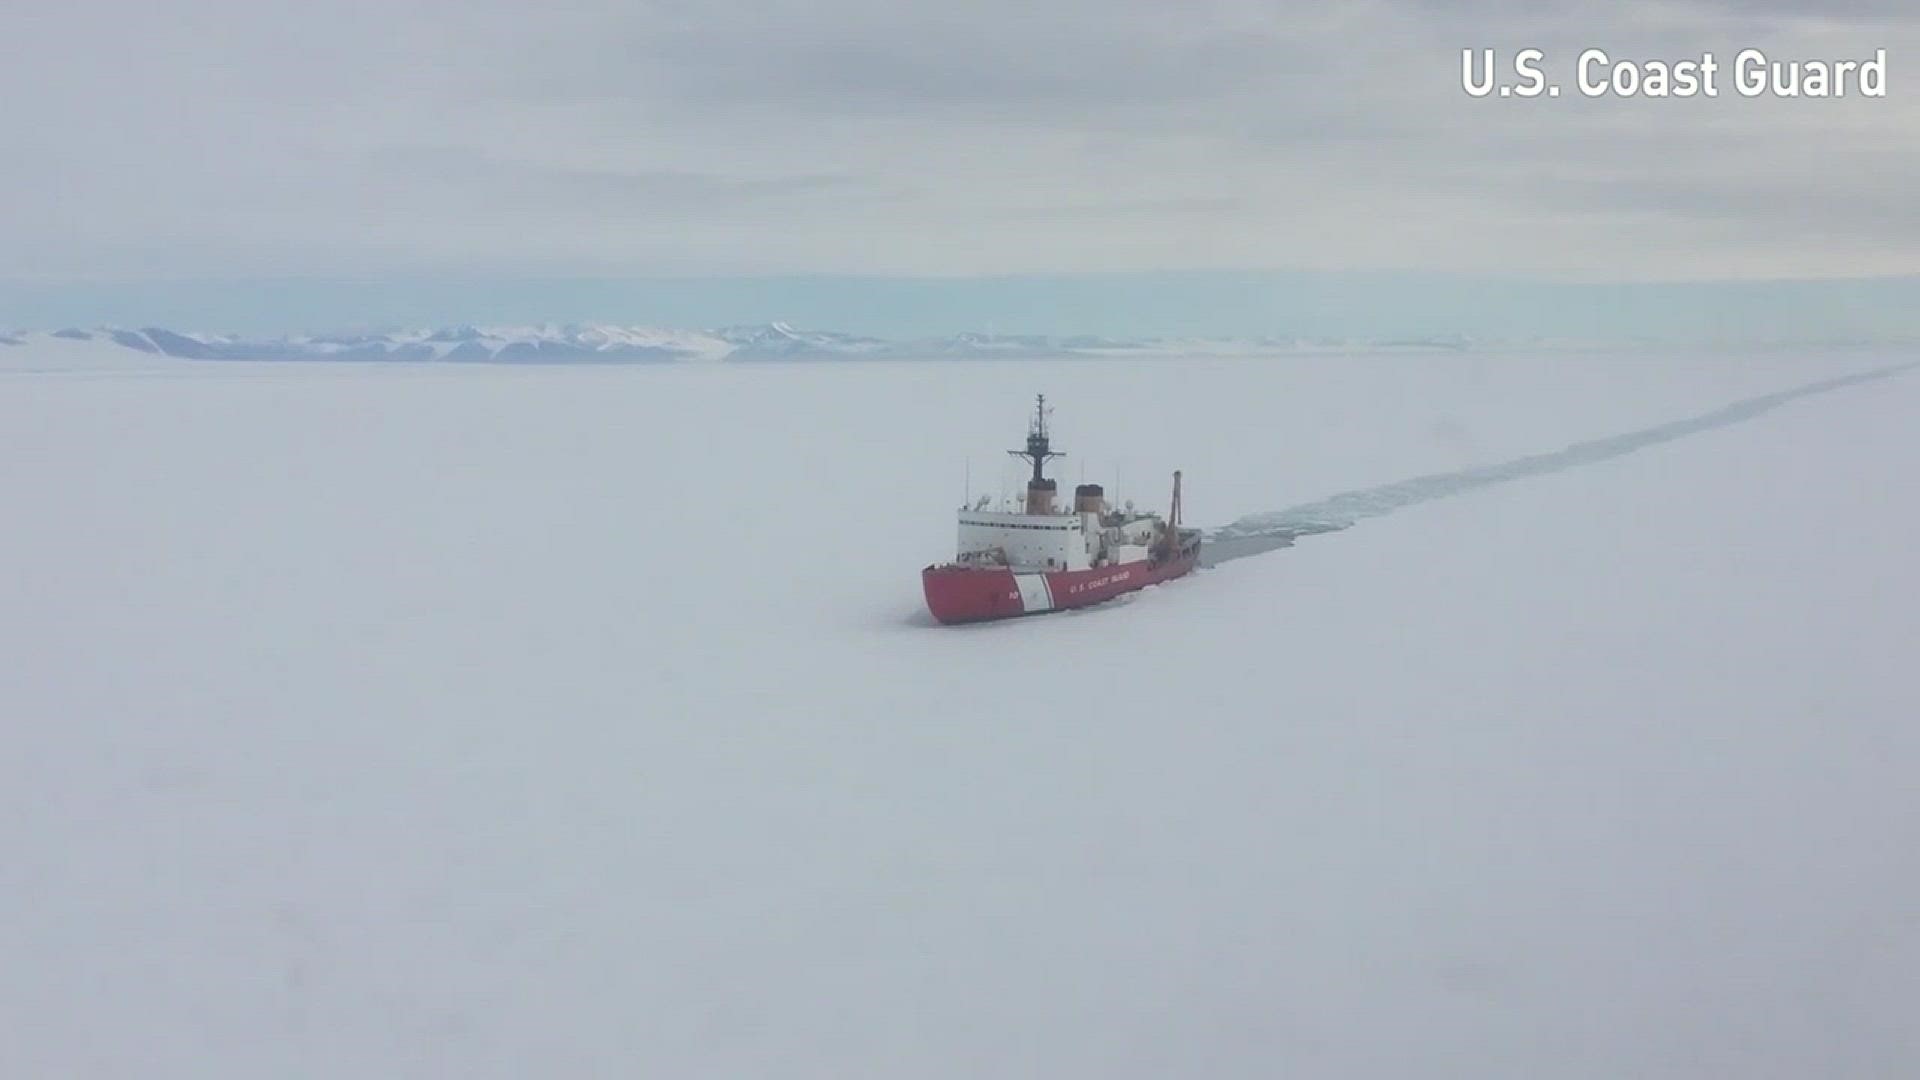 A U.S. Coast Guard cutter has completed its Antarctic mission.